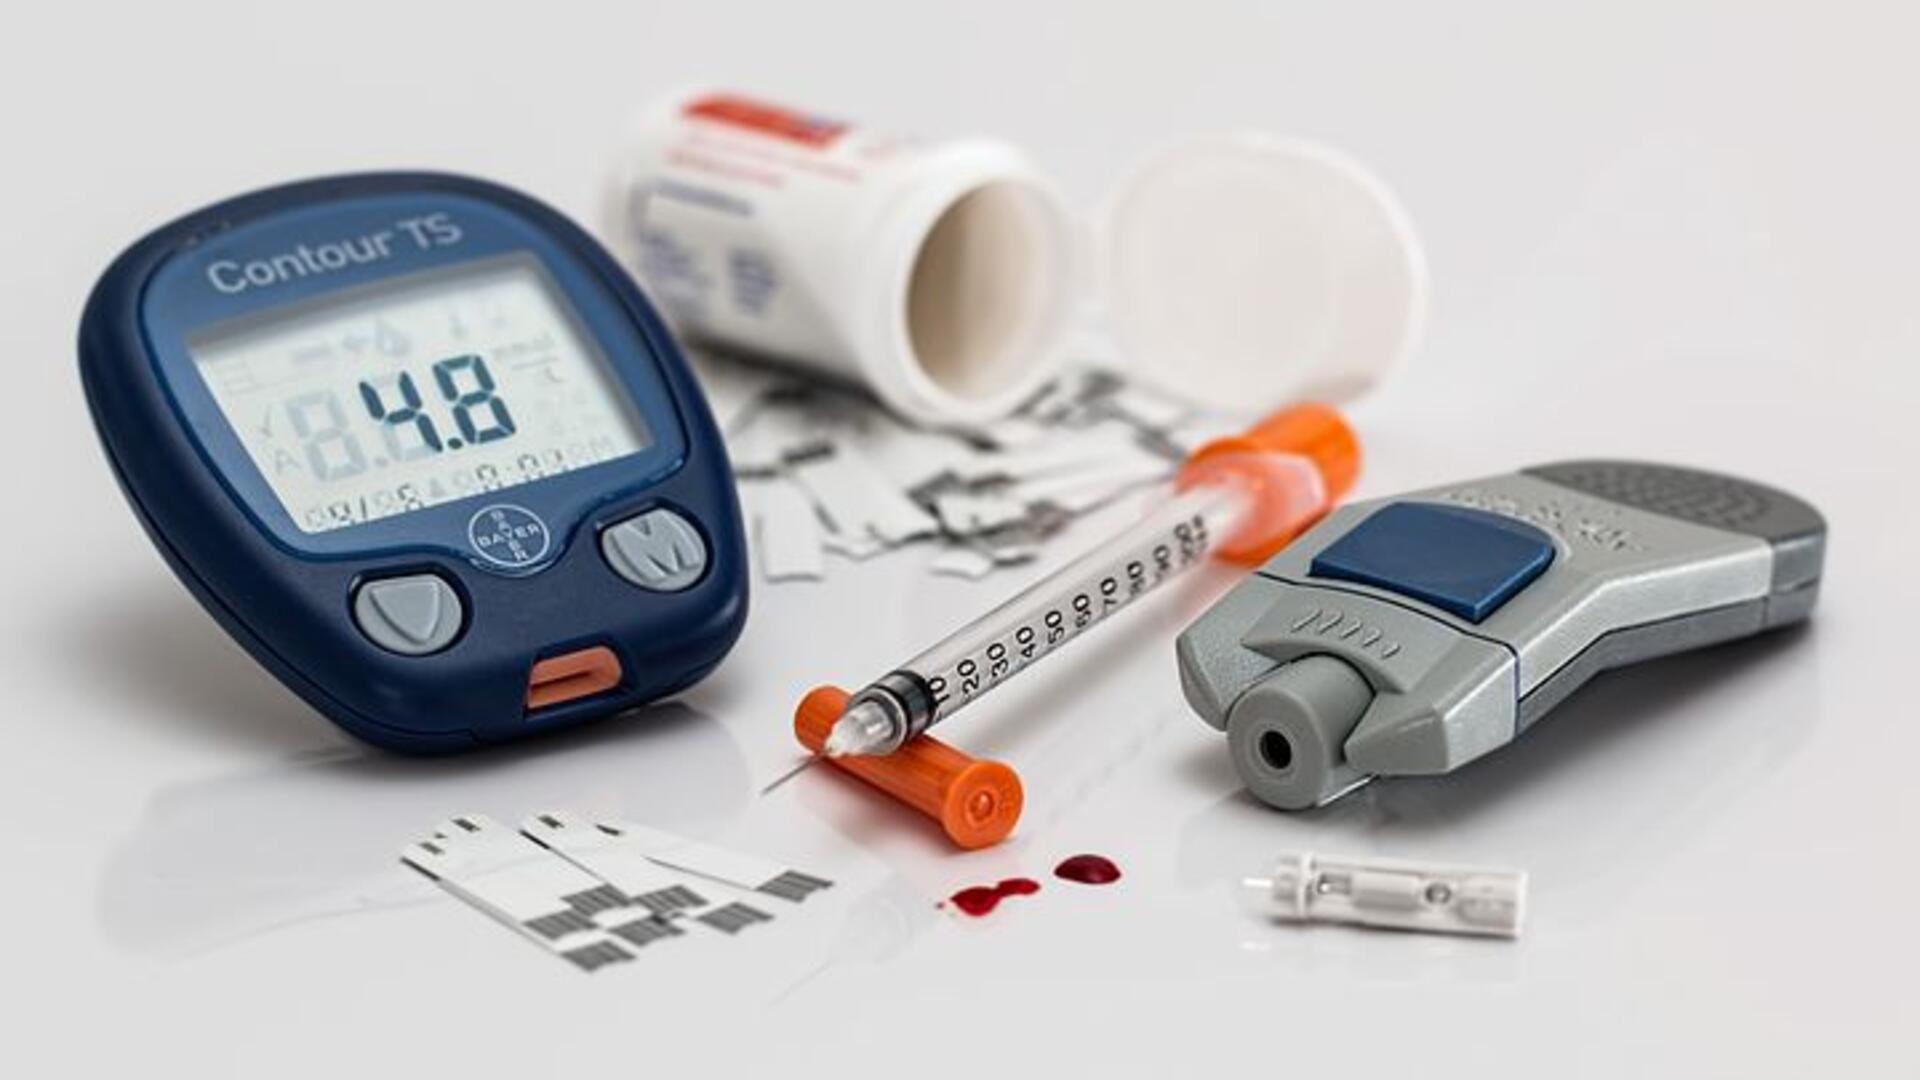 Stock image of diabetes medications and blood sugar testing machines.